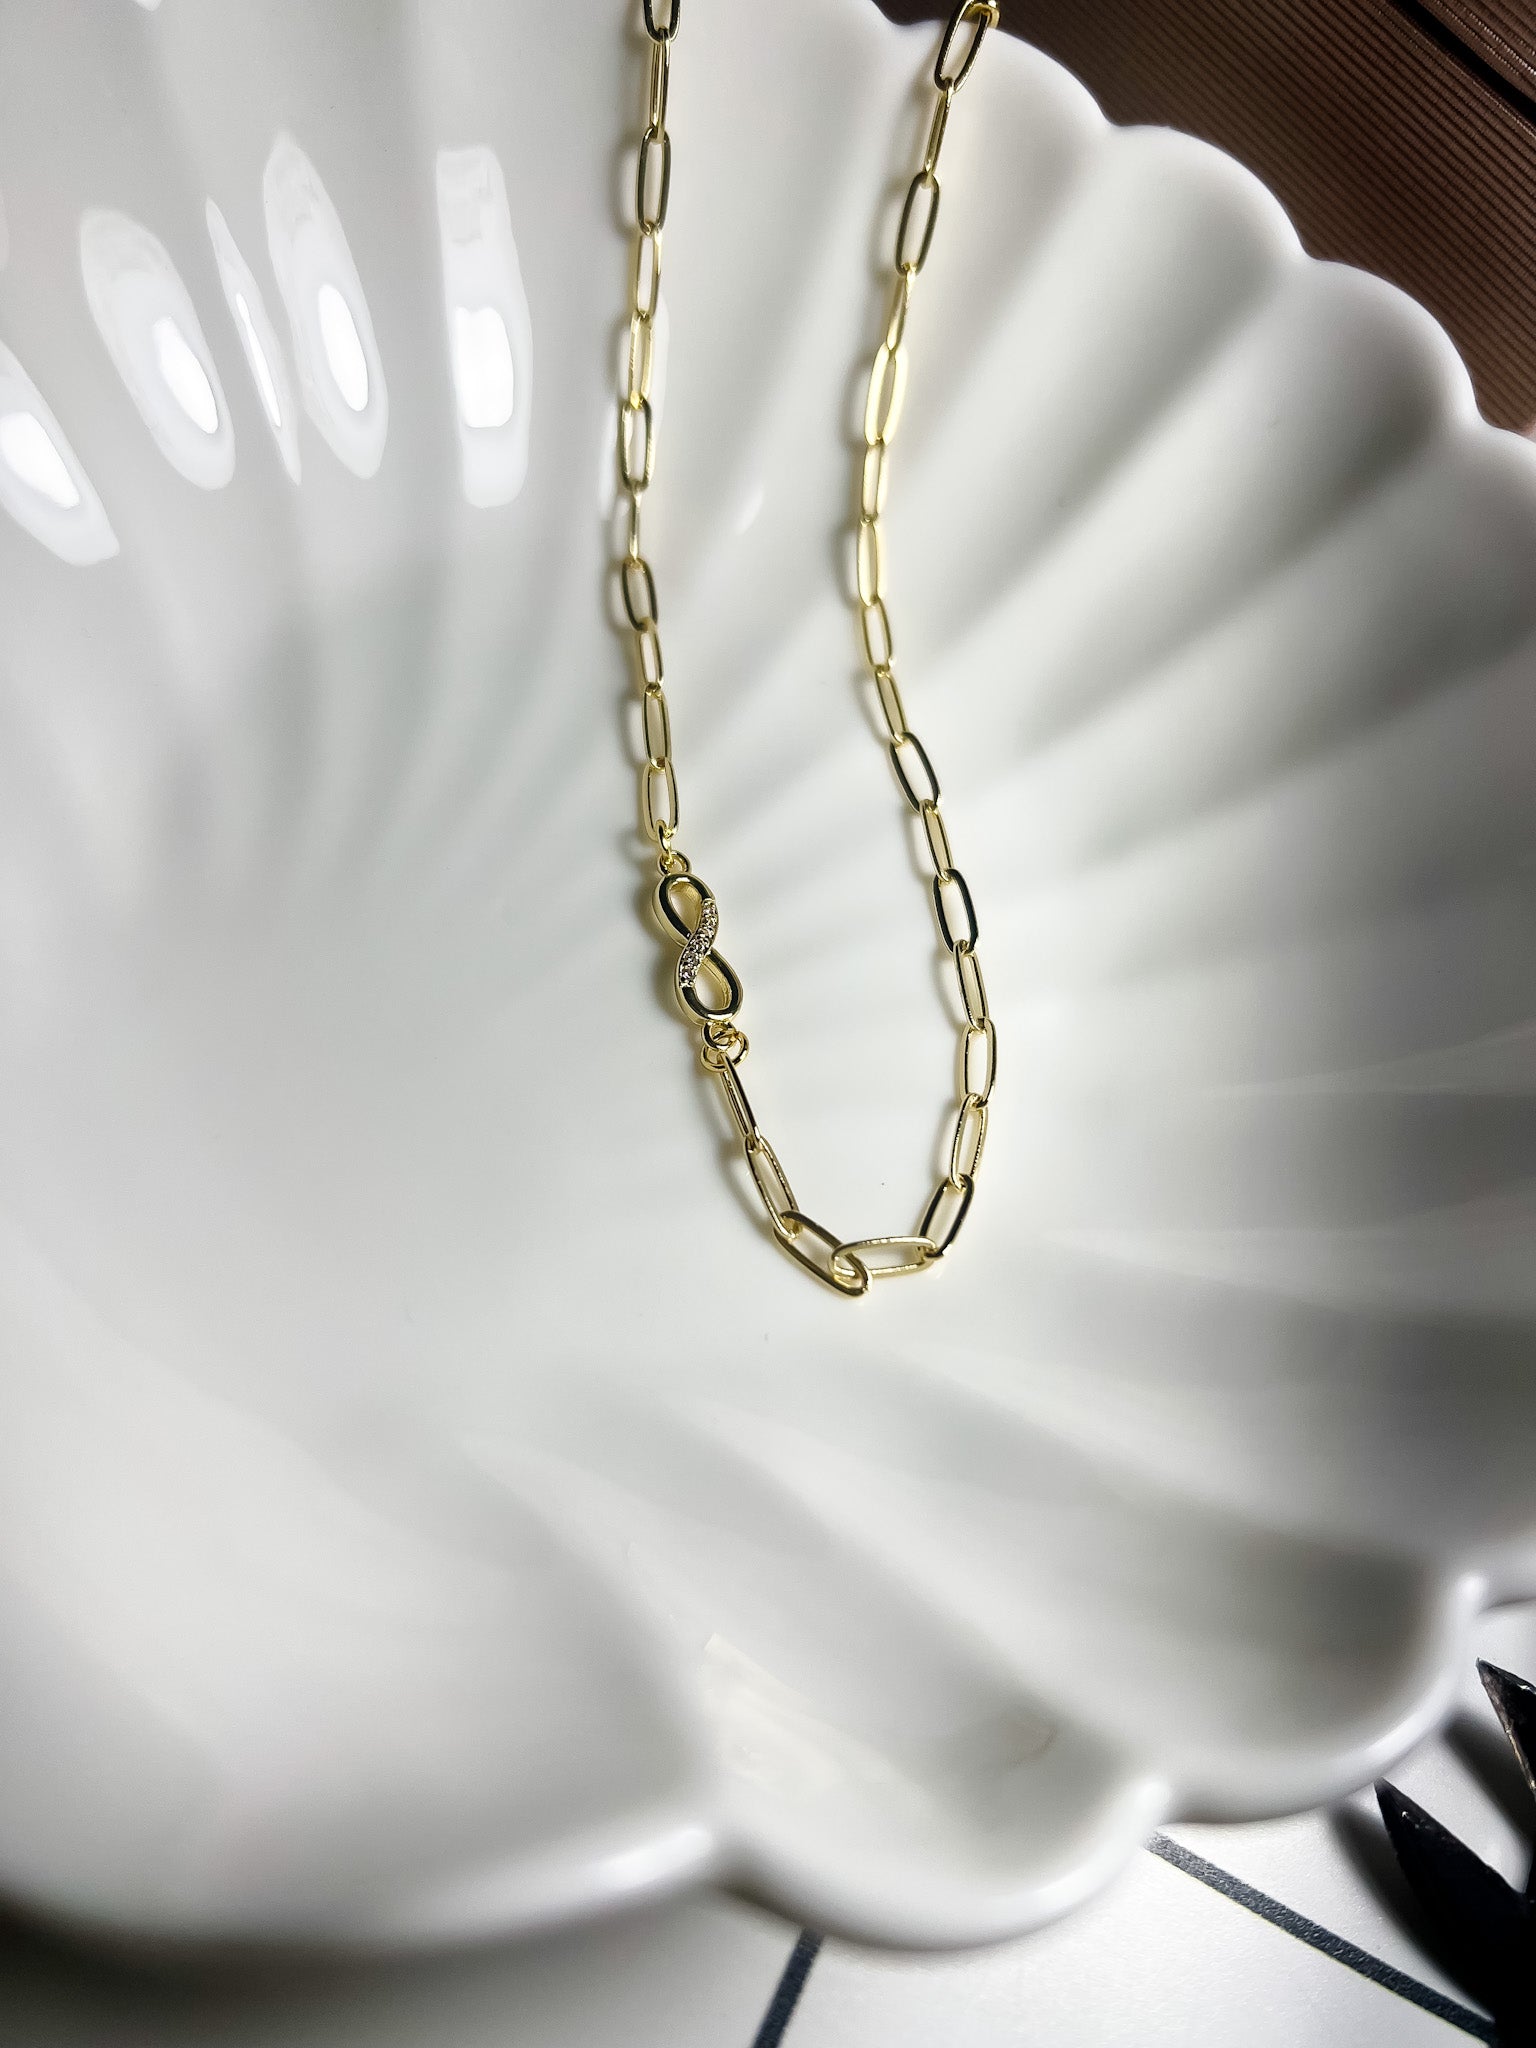 18k Goldplated Infinity Chain Necklace